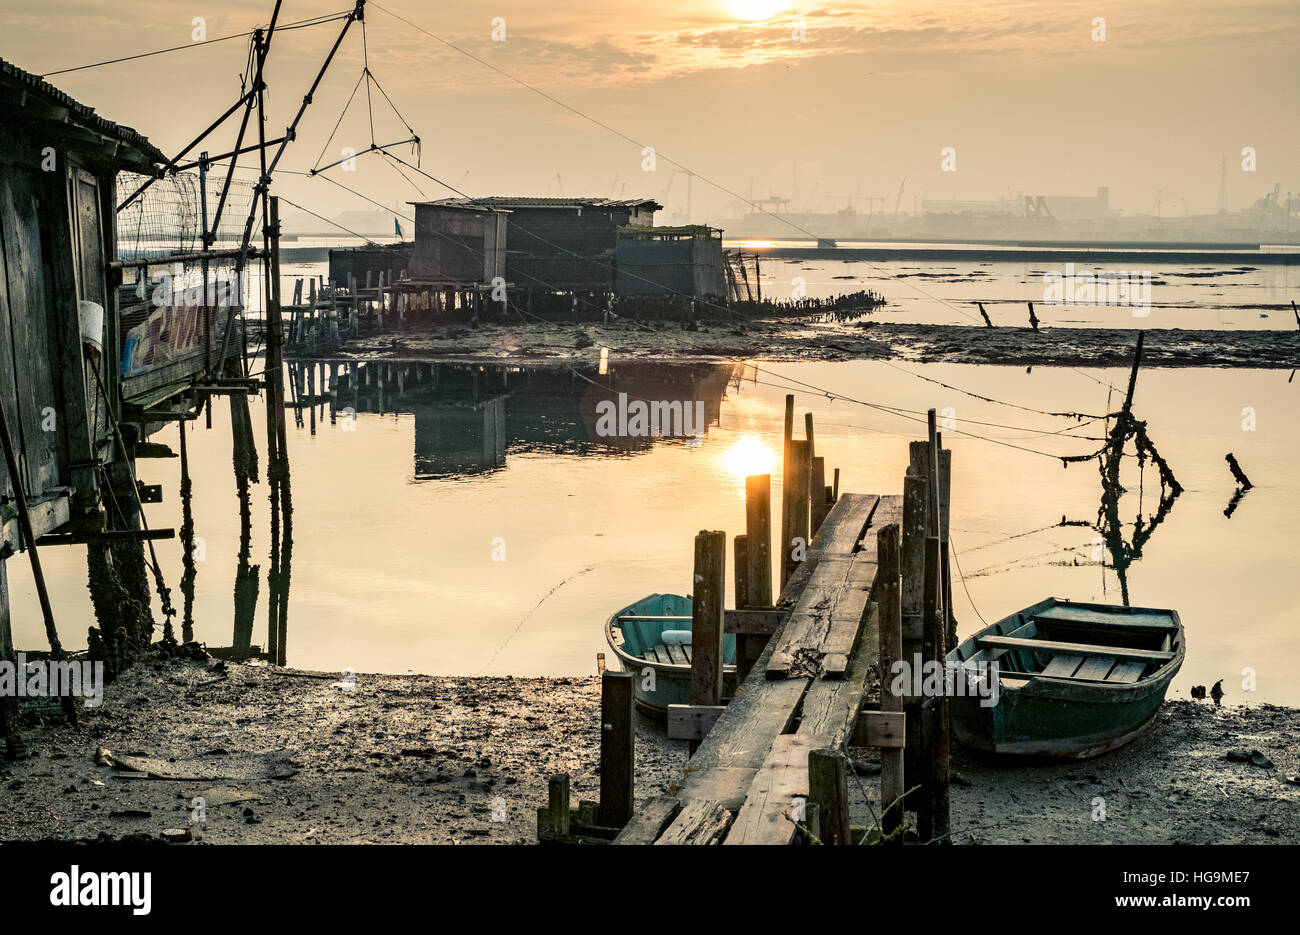 Old fishing huts reflecting in the lagoon of Marina di Ravenna at sunset, industrial harbor on background. Stock Photo